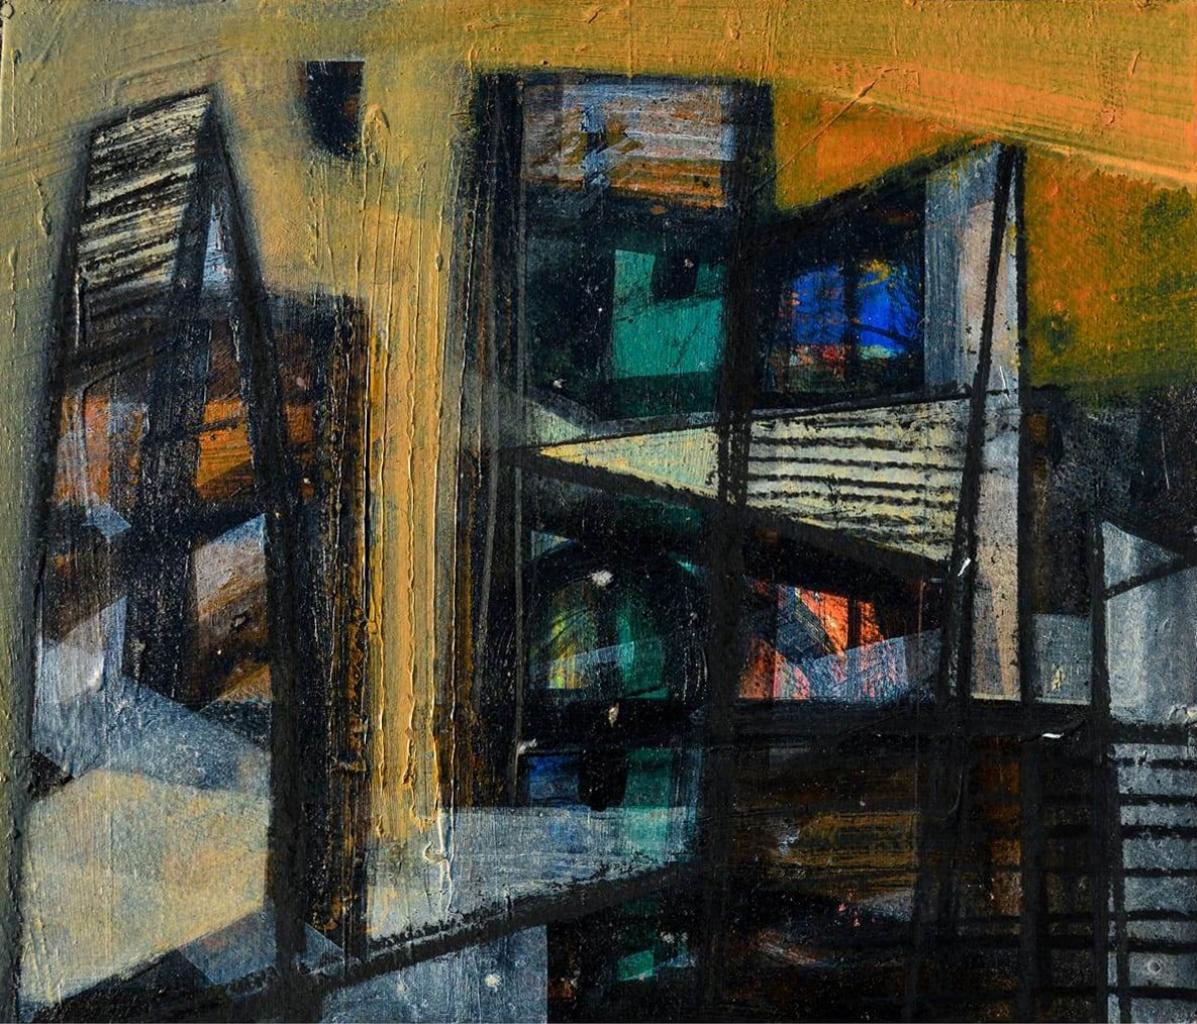 Rajib Bhattacharjee - Spaces in Transition
Acrylic on Archival Paper, 7 x 9 inches (Set of 5)

Rajib Bhattacharjee passed preparatory painting in 1991 from Govt. College of Art and Craft Kolkata and subsequently studied Western Painting at Govt.